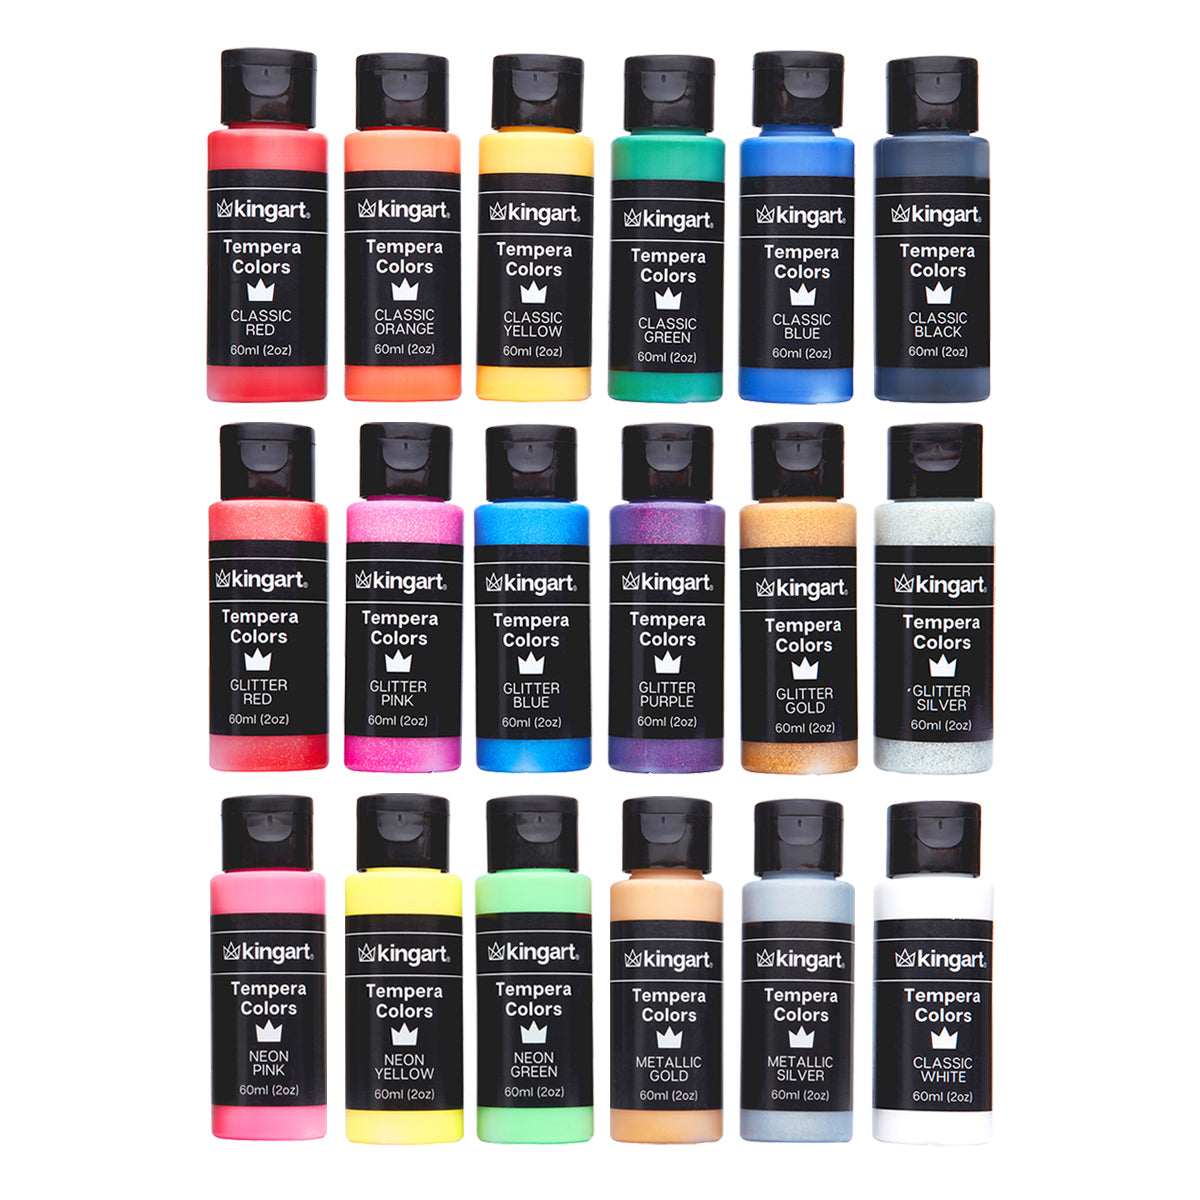 Non-Toxic Washable Glitter Finger Paint for Art Projects